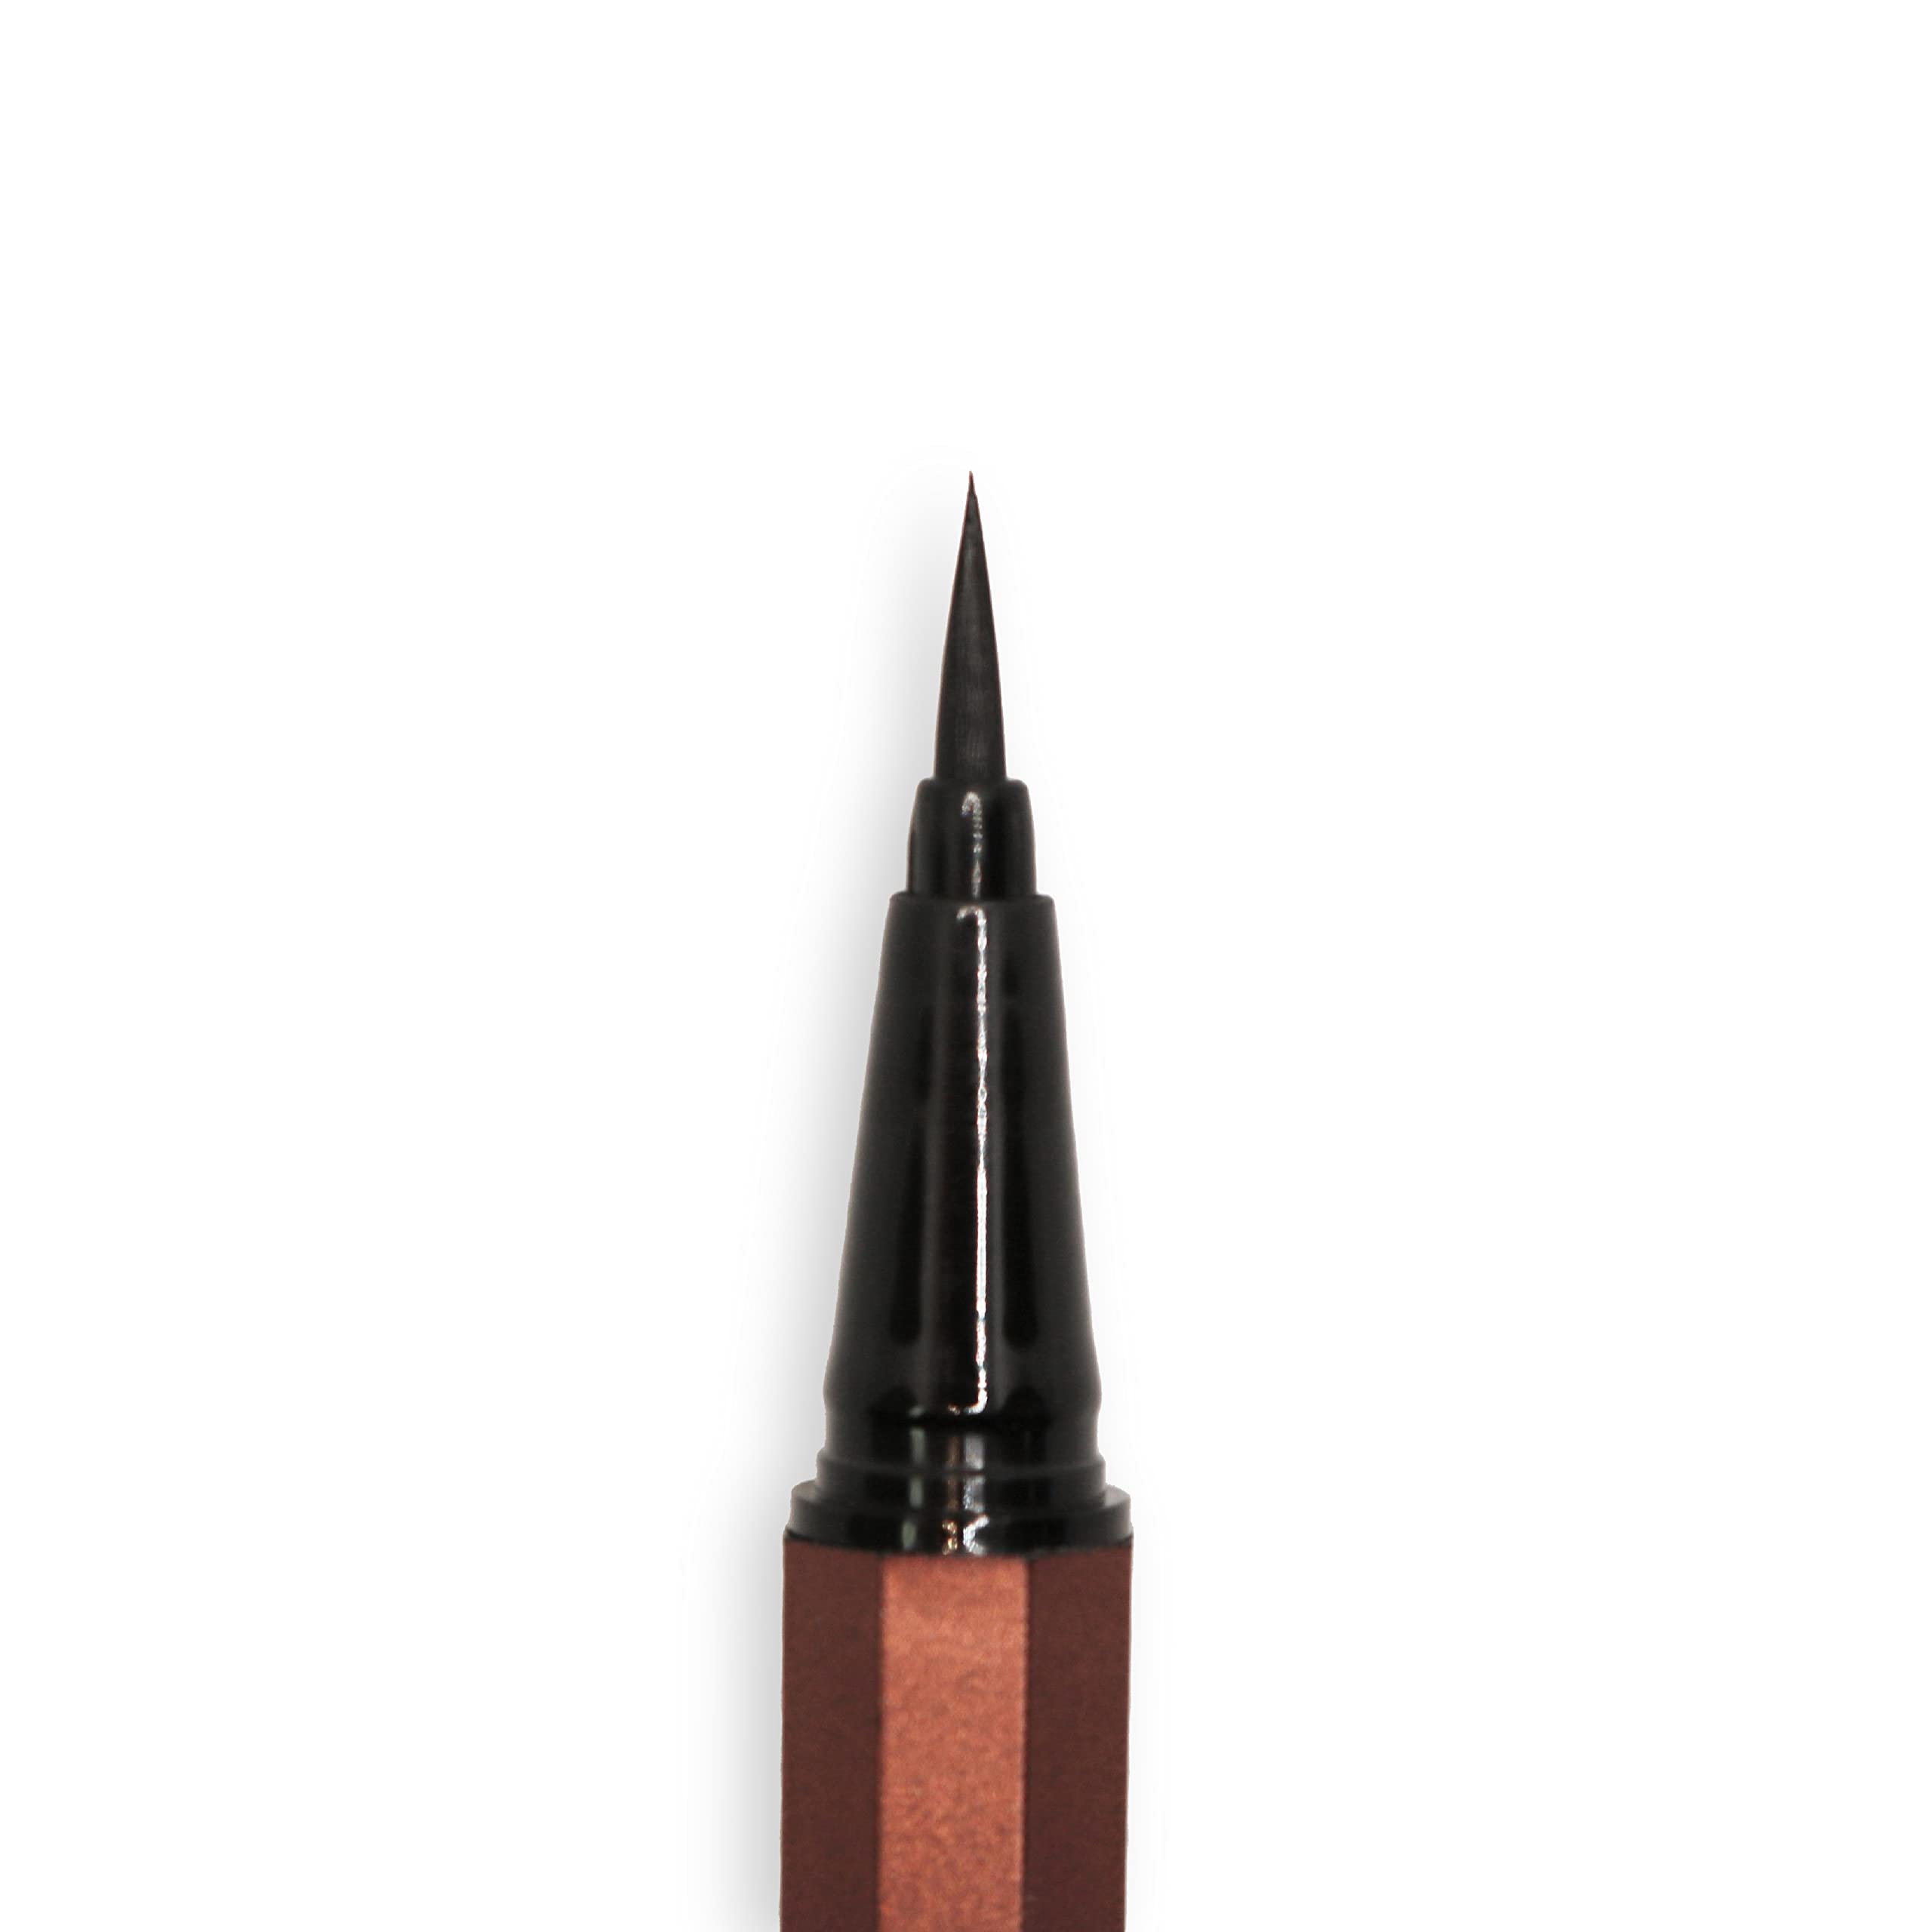 Billion Dollar Brows Raising Brows Liquid Brow Pen, Eyebrow Pen with a MicroTip Applicator Creates Natural Looking Brows Effortlessly and Stays on All Day, Taupe